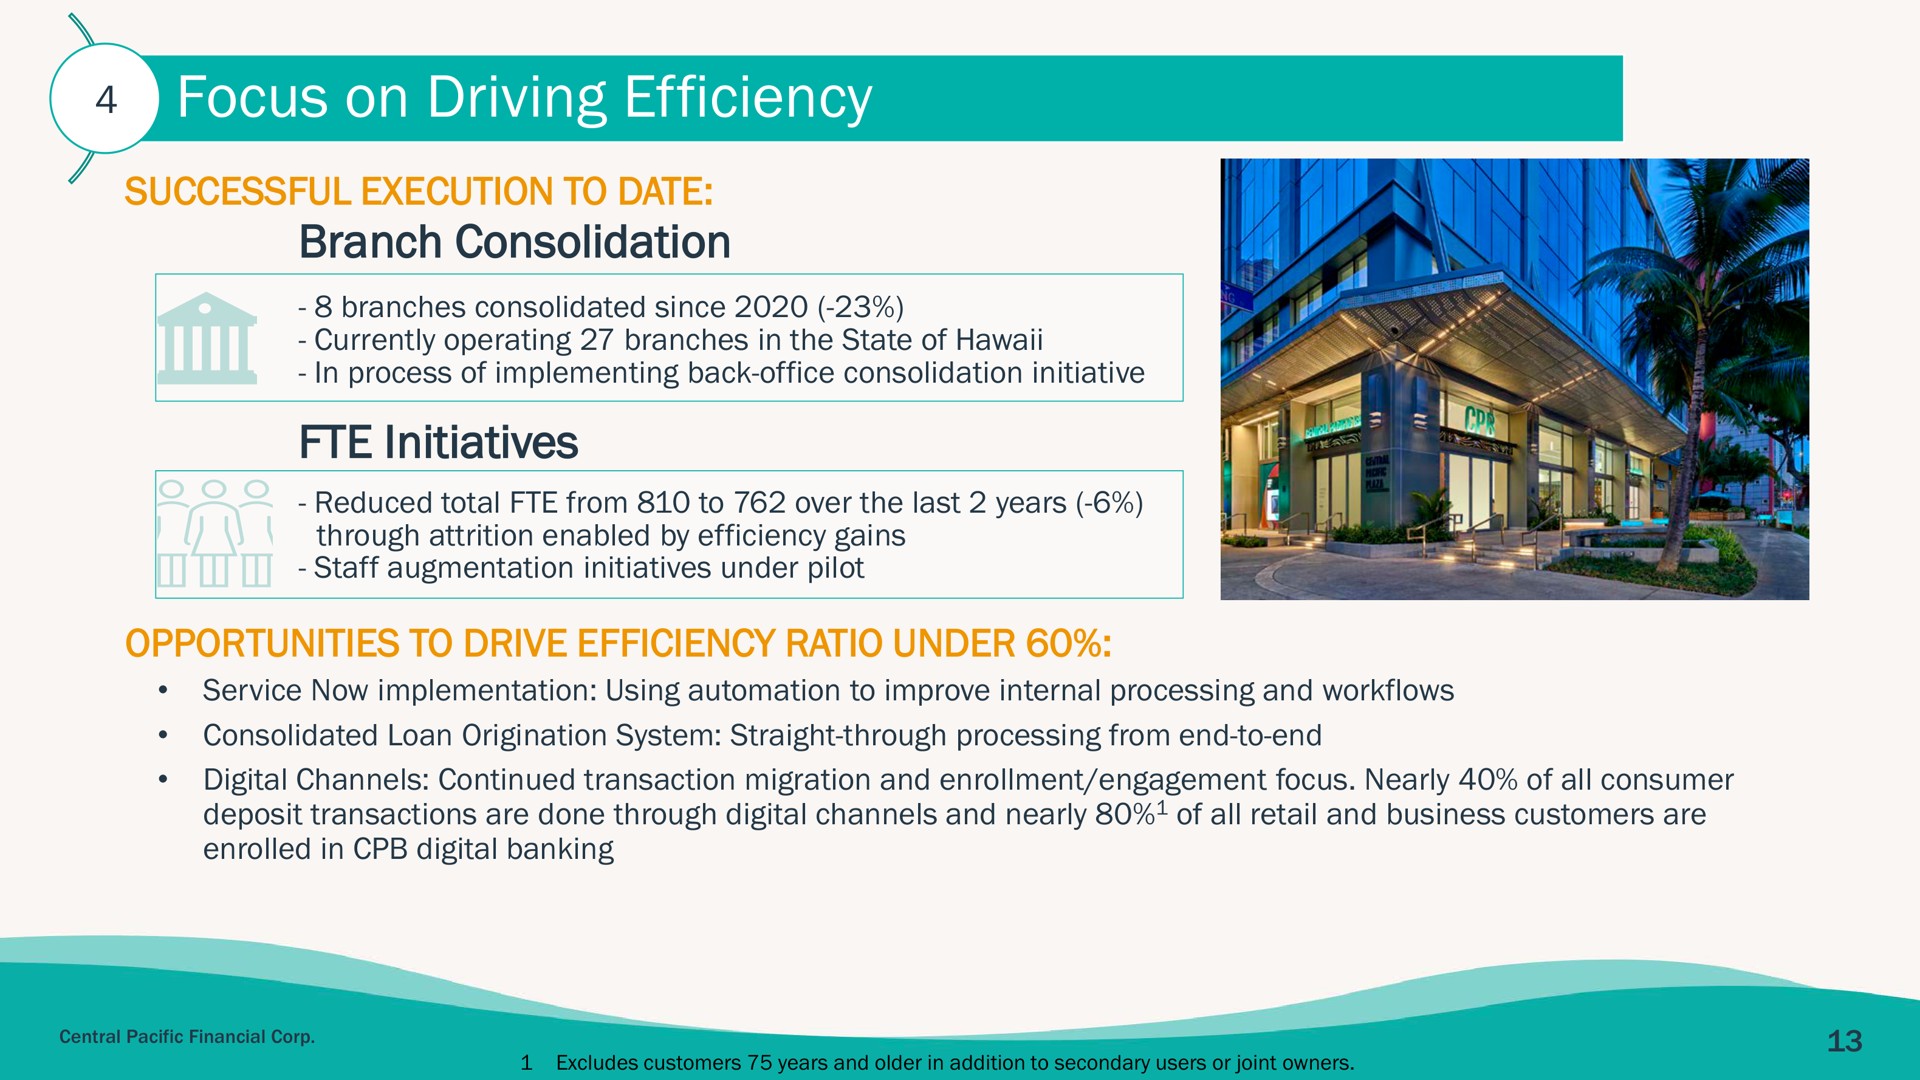 focus on driving efficiency branch consolidation initiatives | Central Pacific Financial